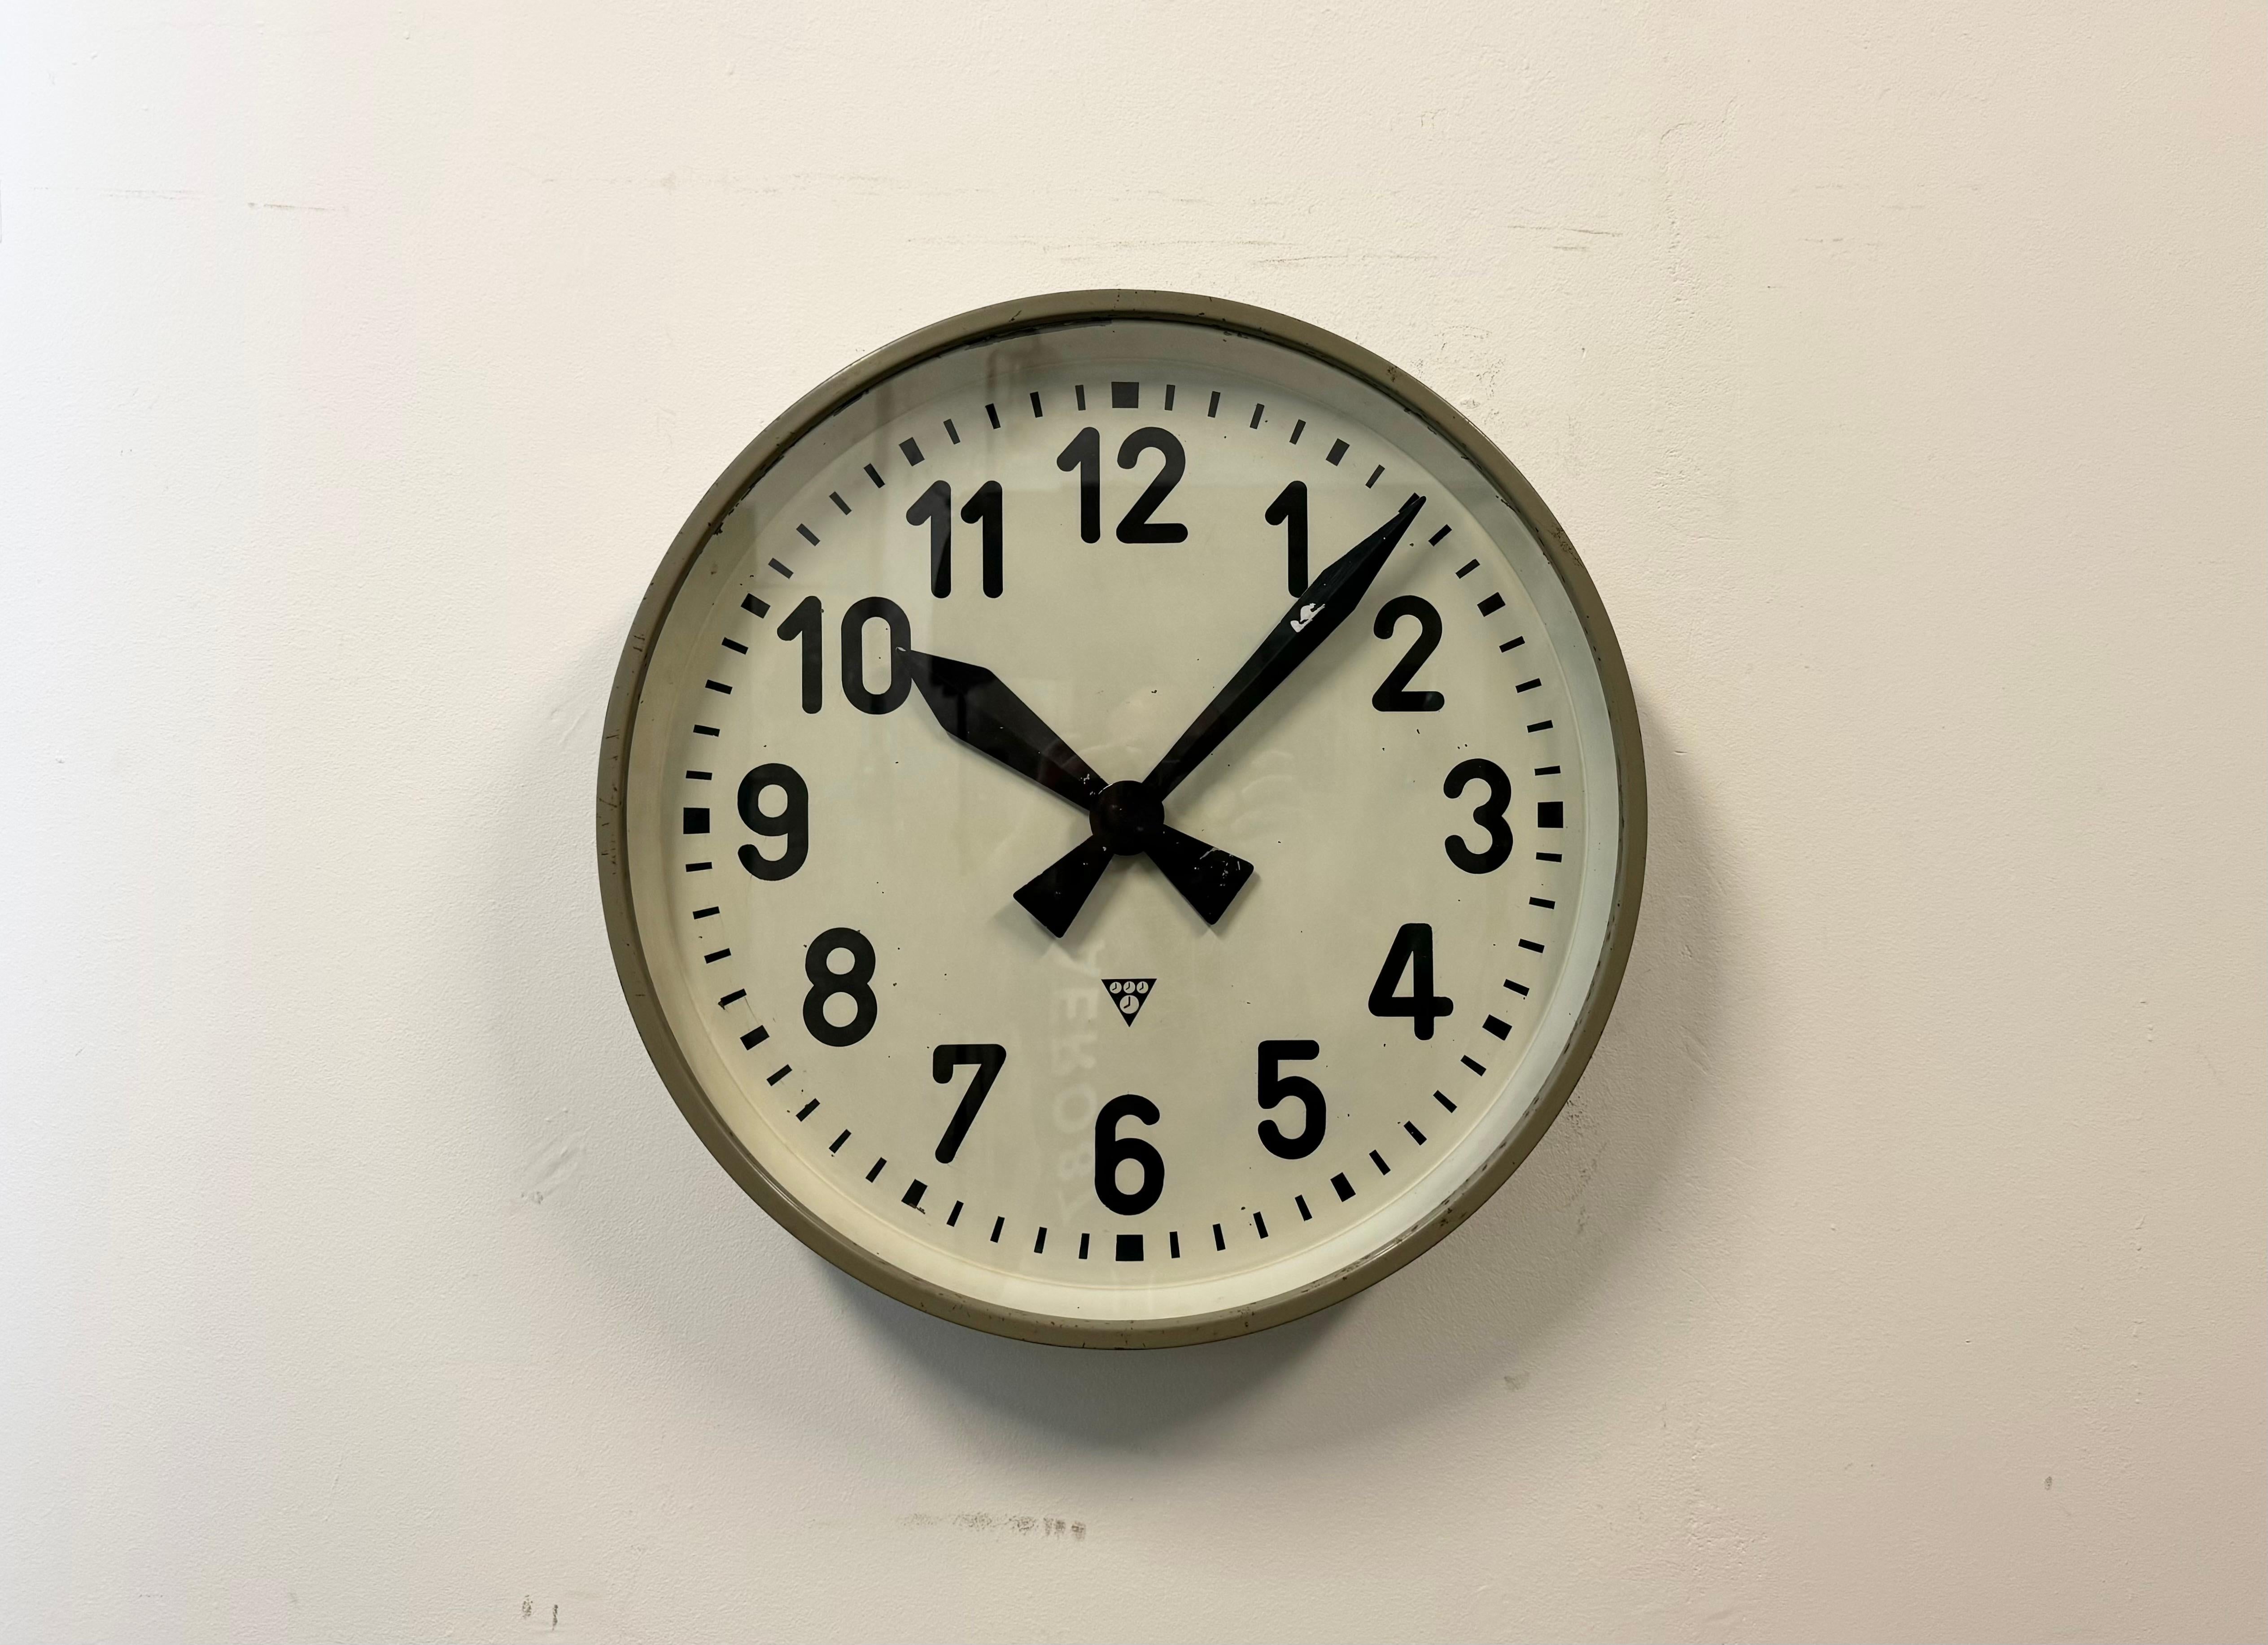 This wall clock was produced by Pragotron in former Czechoslovakia during the 1960s. It features a grey metal frame, an iron dial, an aluminium hands and a clear glass cover. The piece has been converted into a battery-powered clockwork and requires